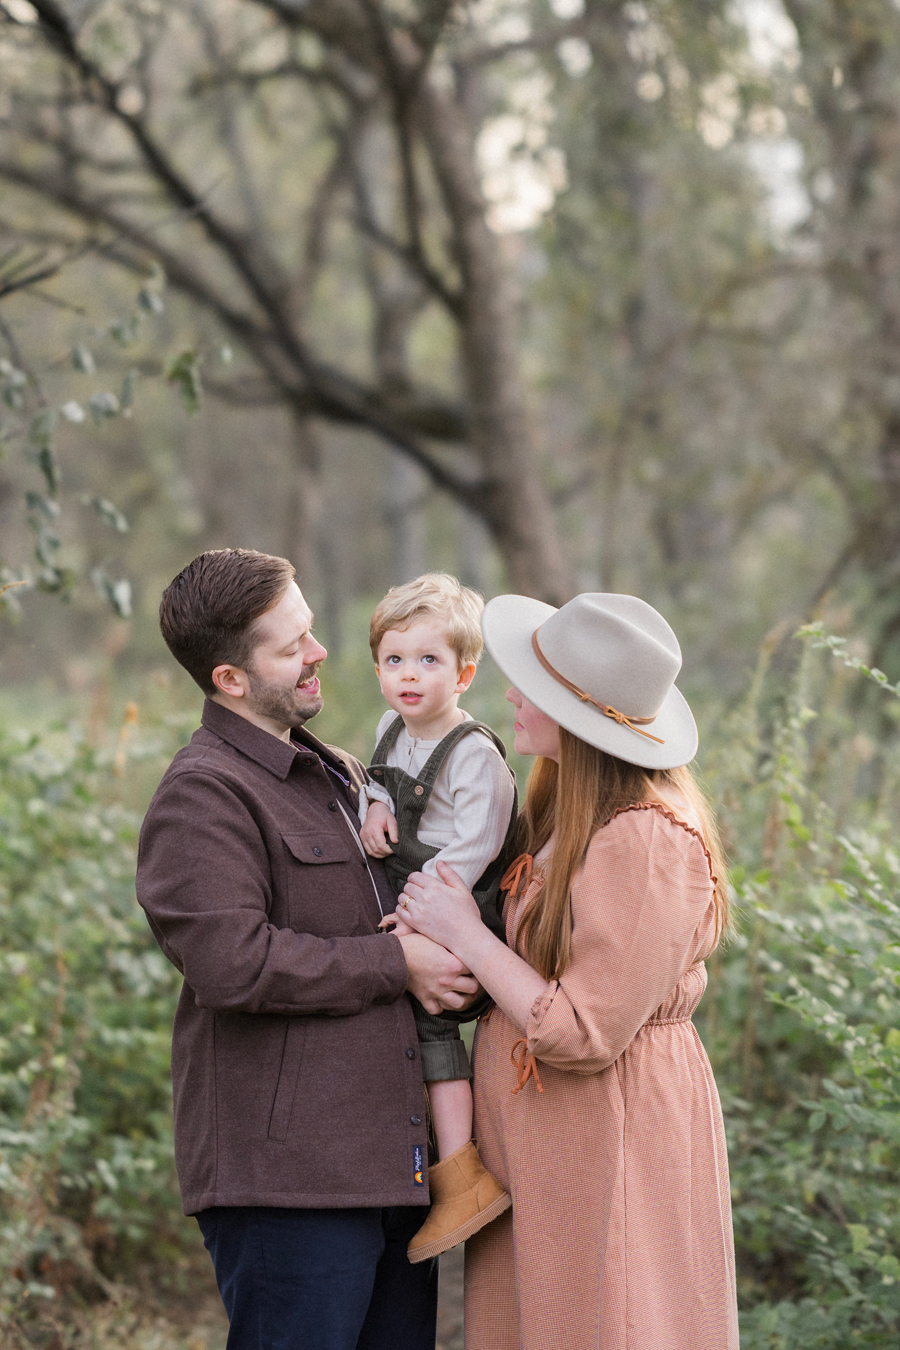 A family takes outdoor family portrait in fall by Columbia, Missouri family photographer Love Tree Studios.